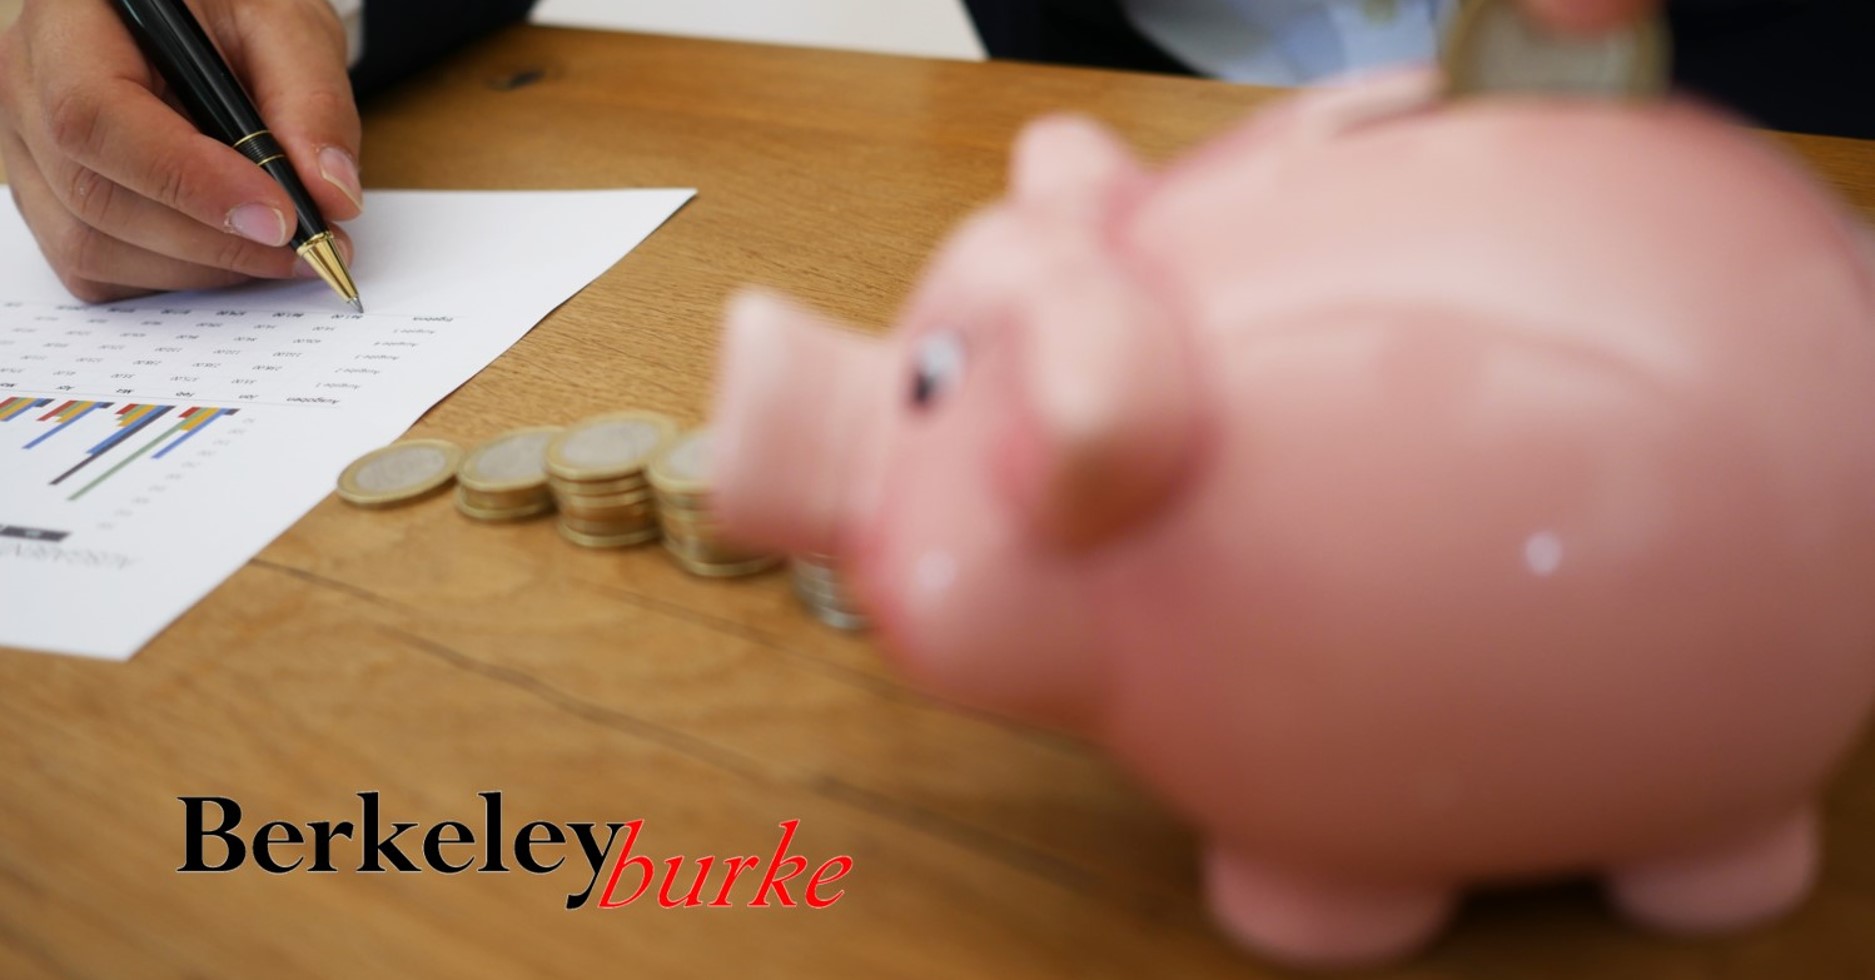 Berkeley Burke bought by pensions consolidator business